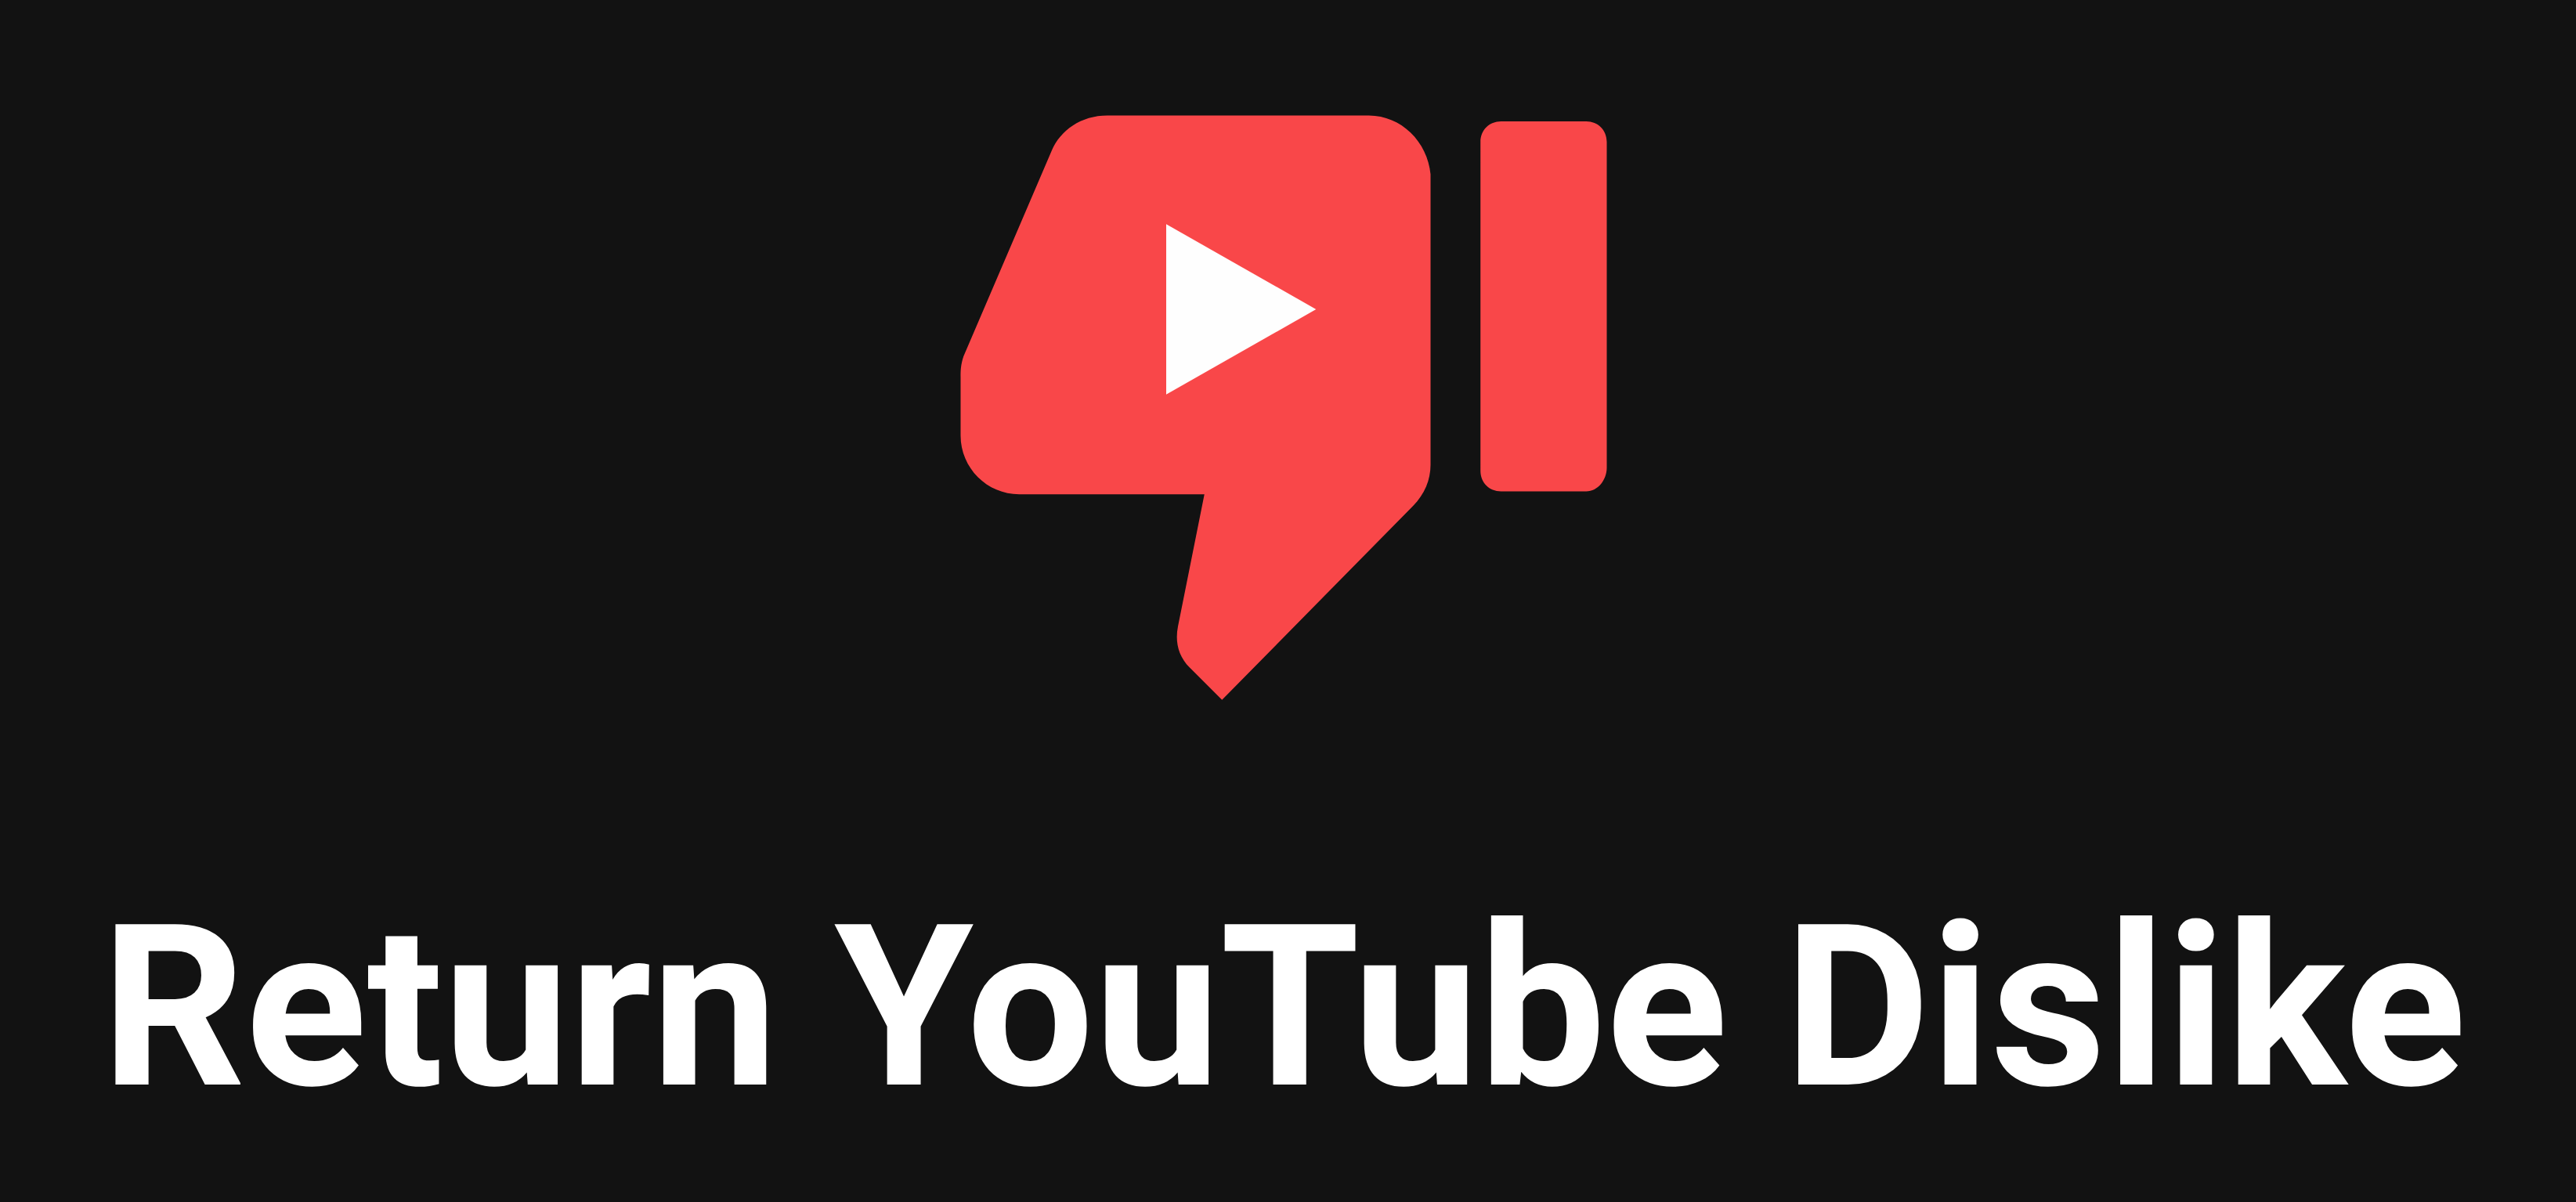 How to get the YouTube dislike count back RouteNote Blog